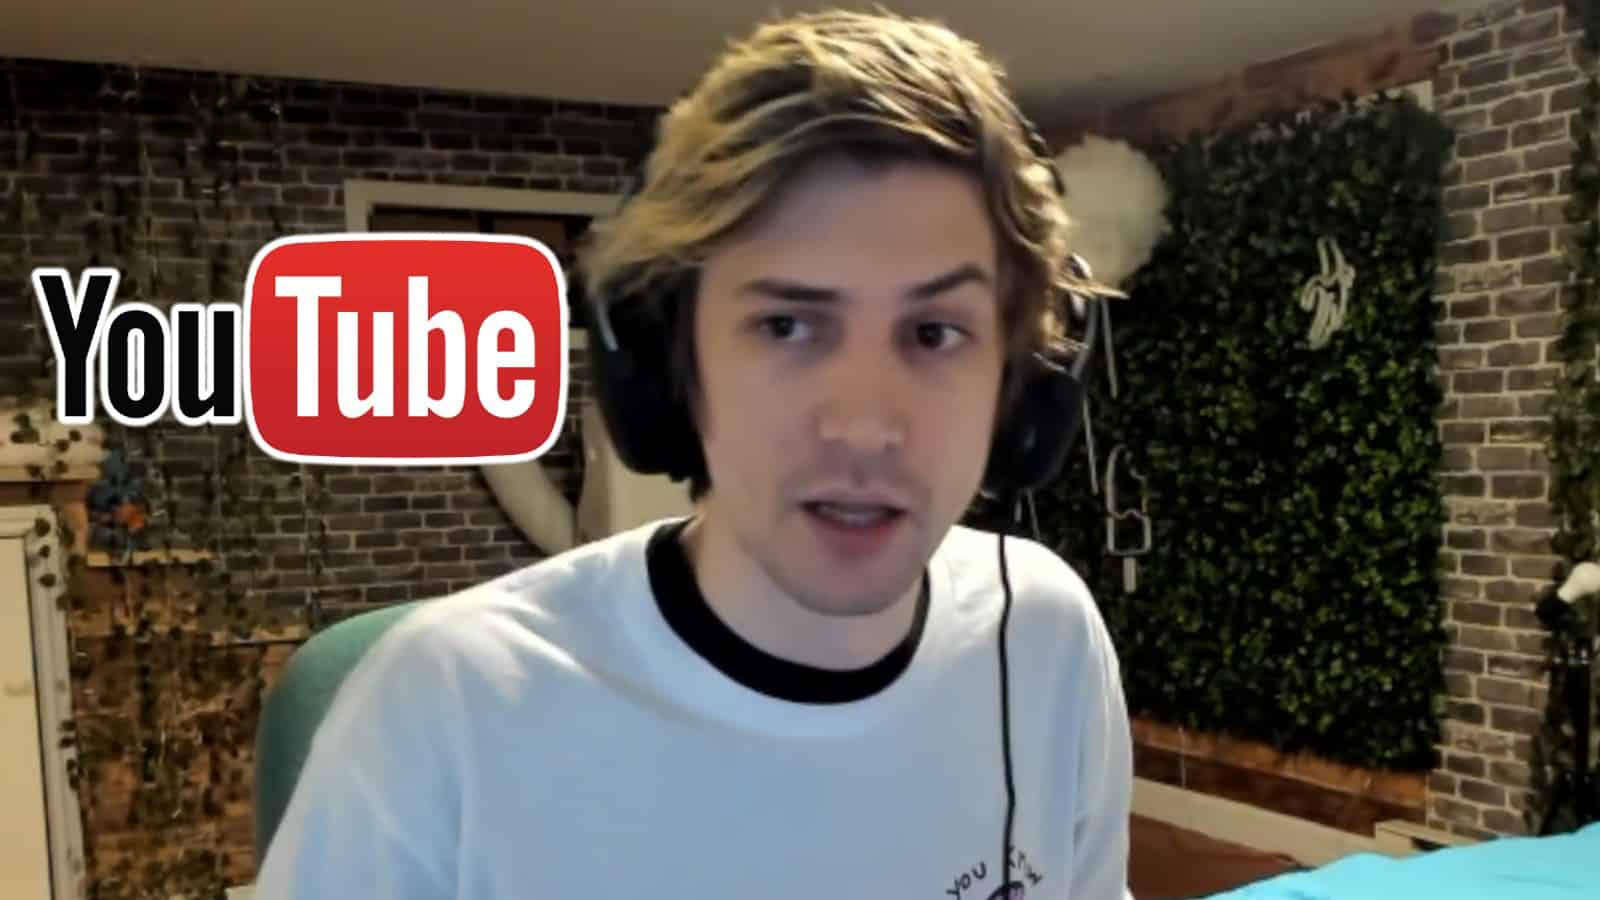 xQc streaming on Twitch with YouTube logo